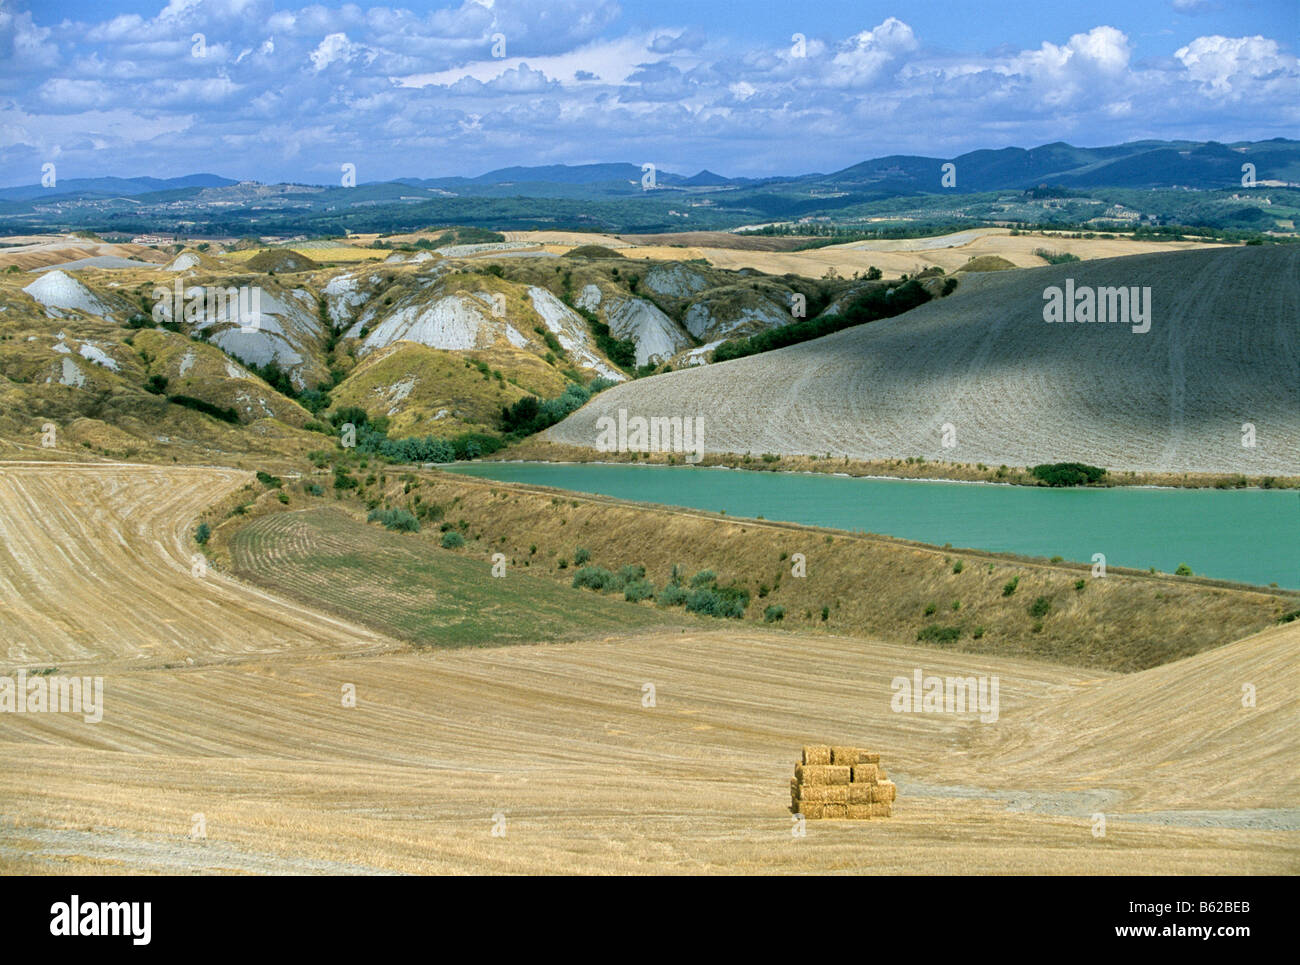 Artificial lake in an eroded landscape, Le Crete near Leonina, Siena Province, Tuscany, Italy, Europe Stock Photo